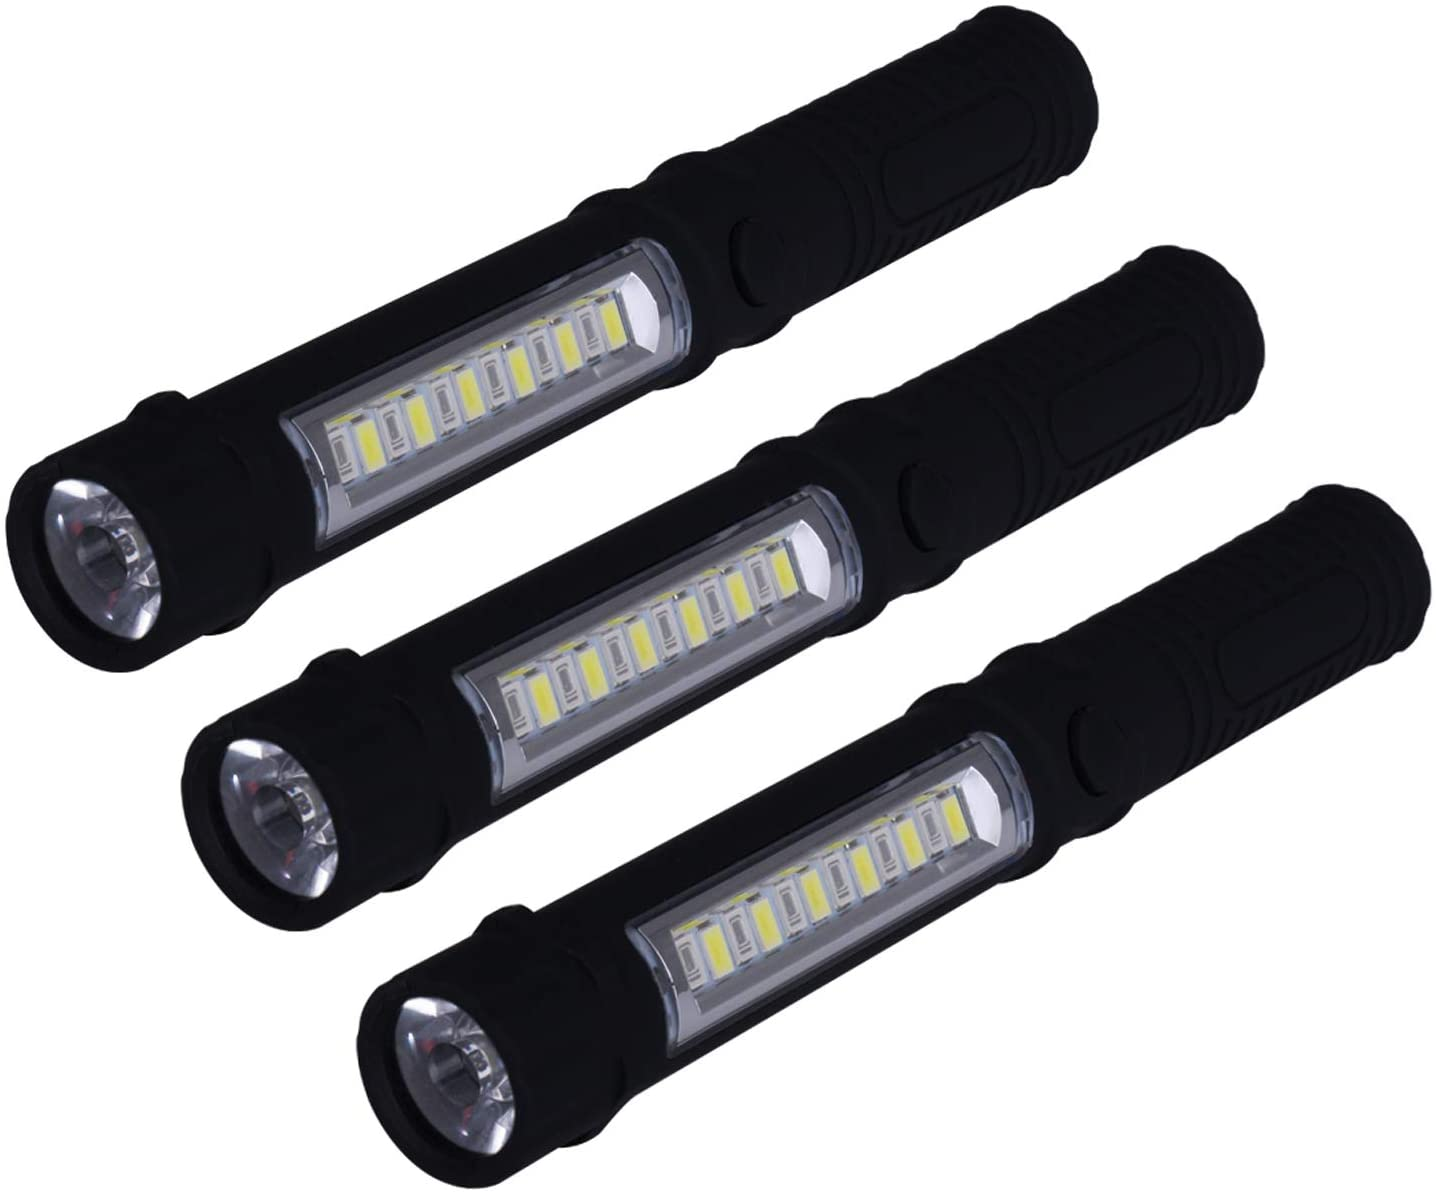 Newvan Tech 3 in 1 Multi-Function LED Flashlight with Magnetic Base, Black, Pack of 3